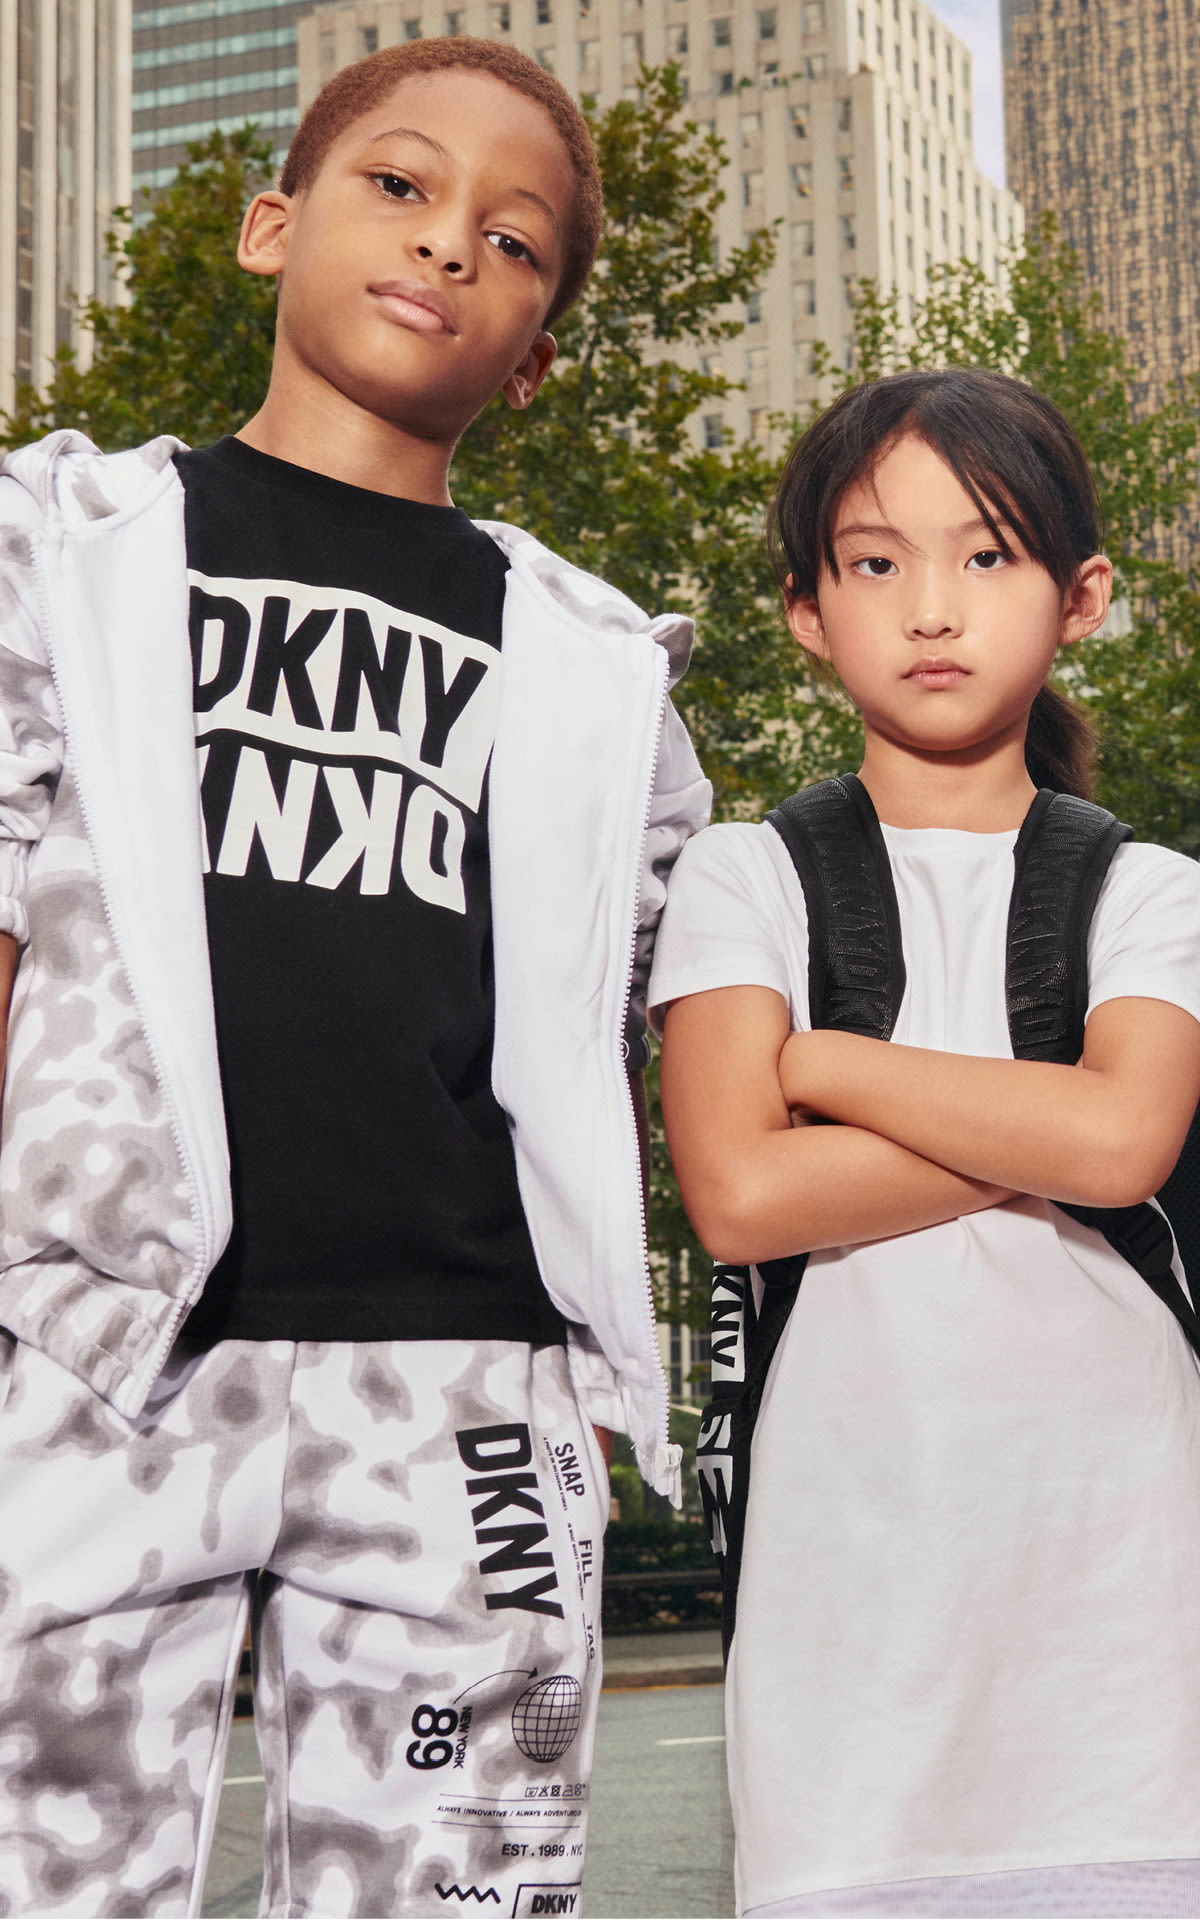 Kids dressed in black and red DKNY clothes